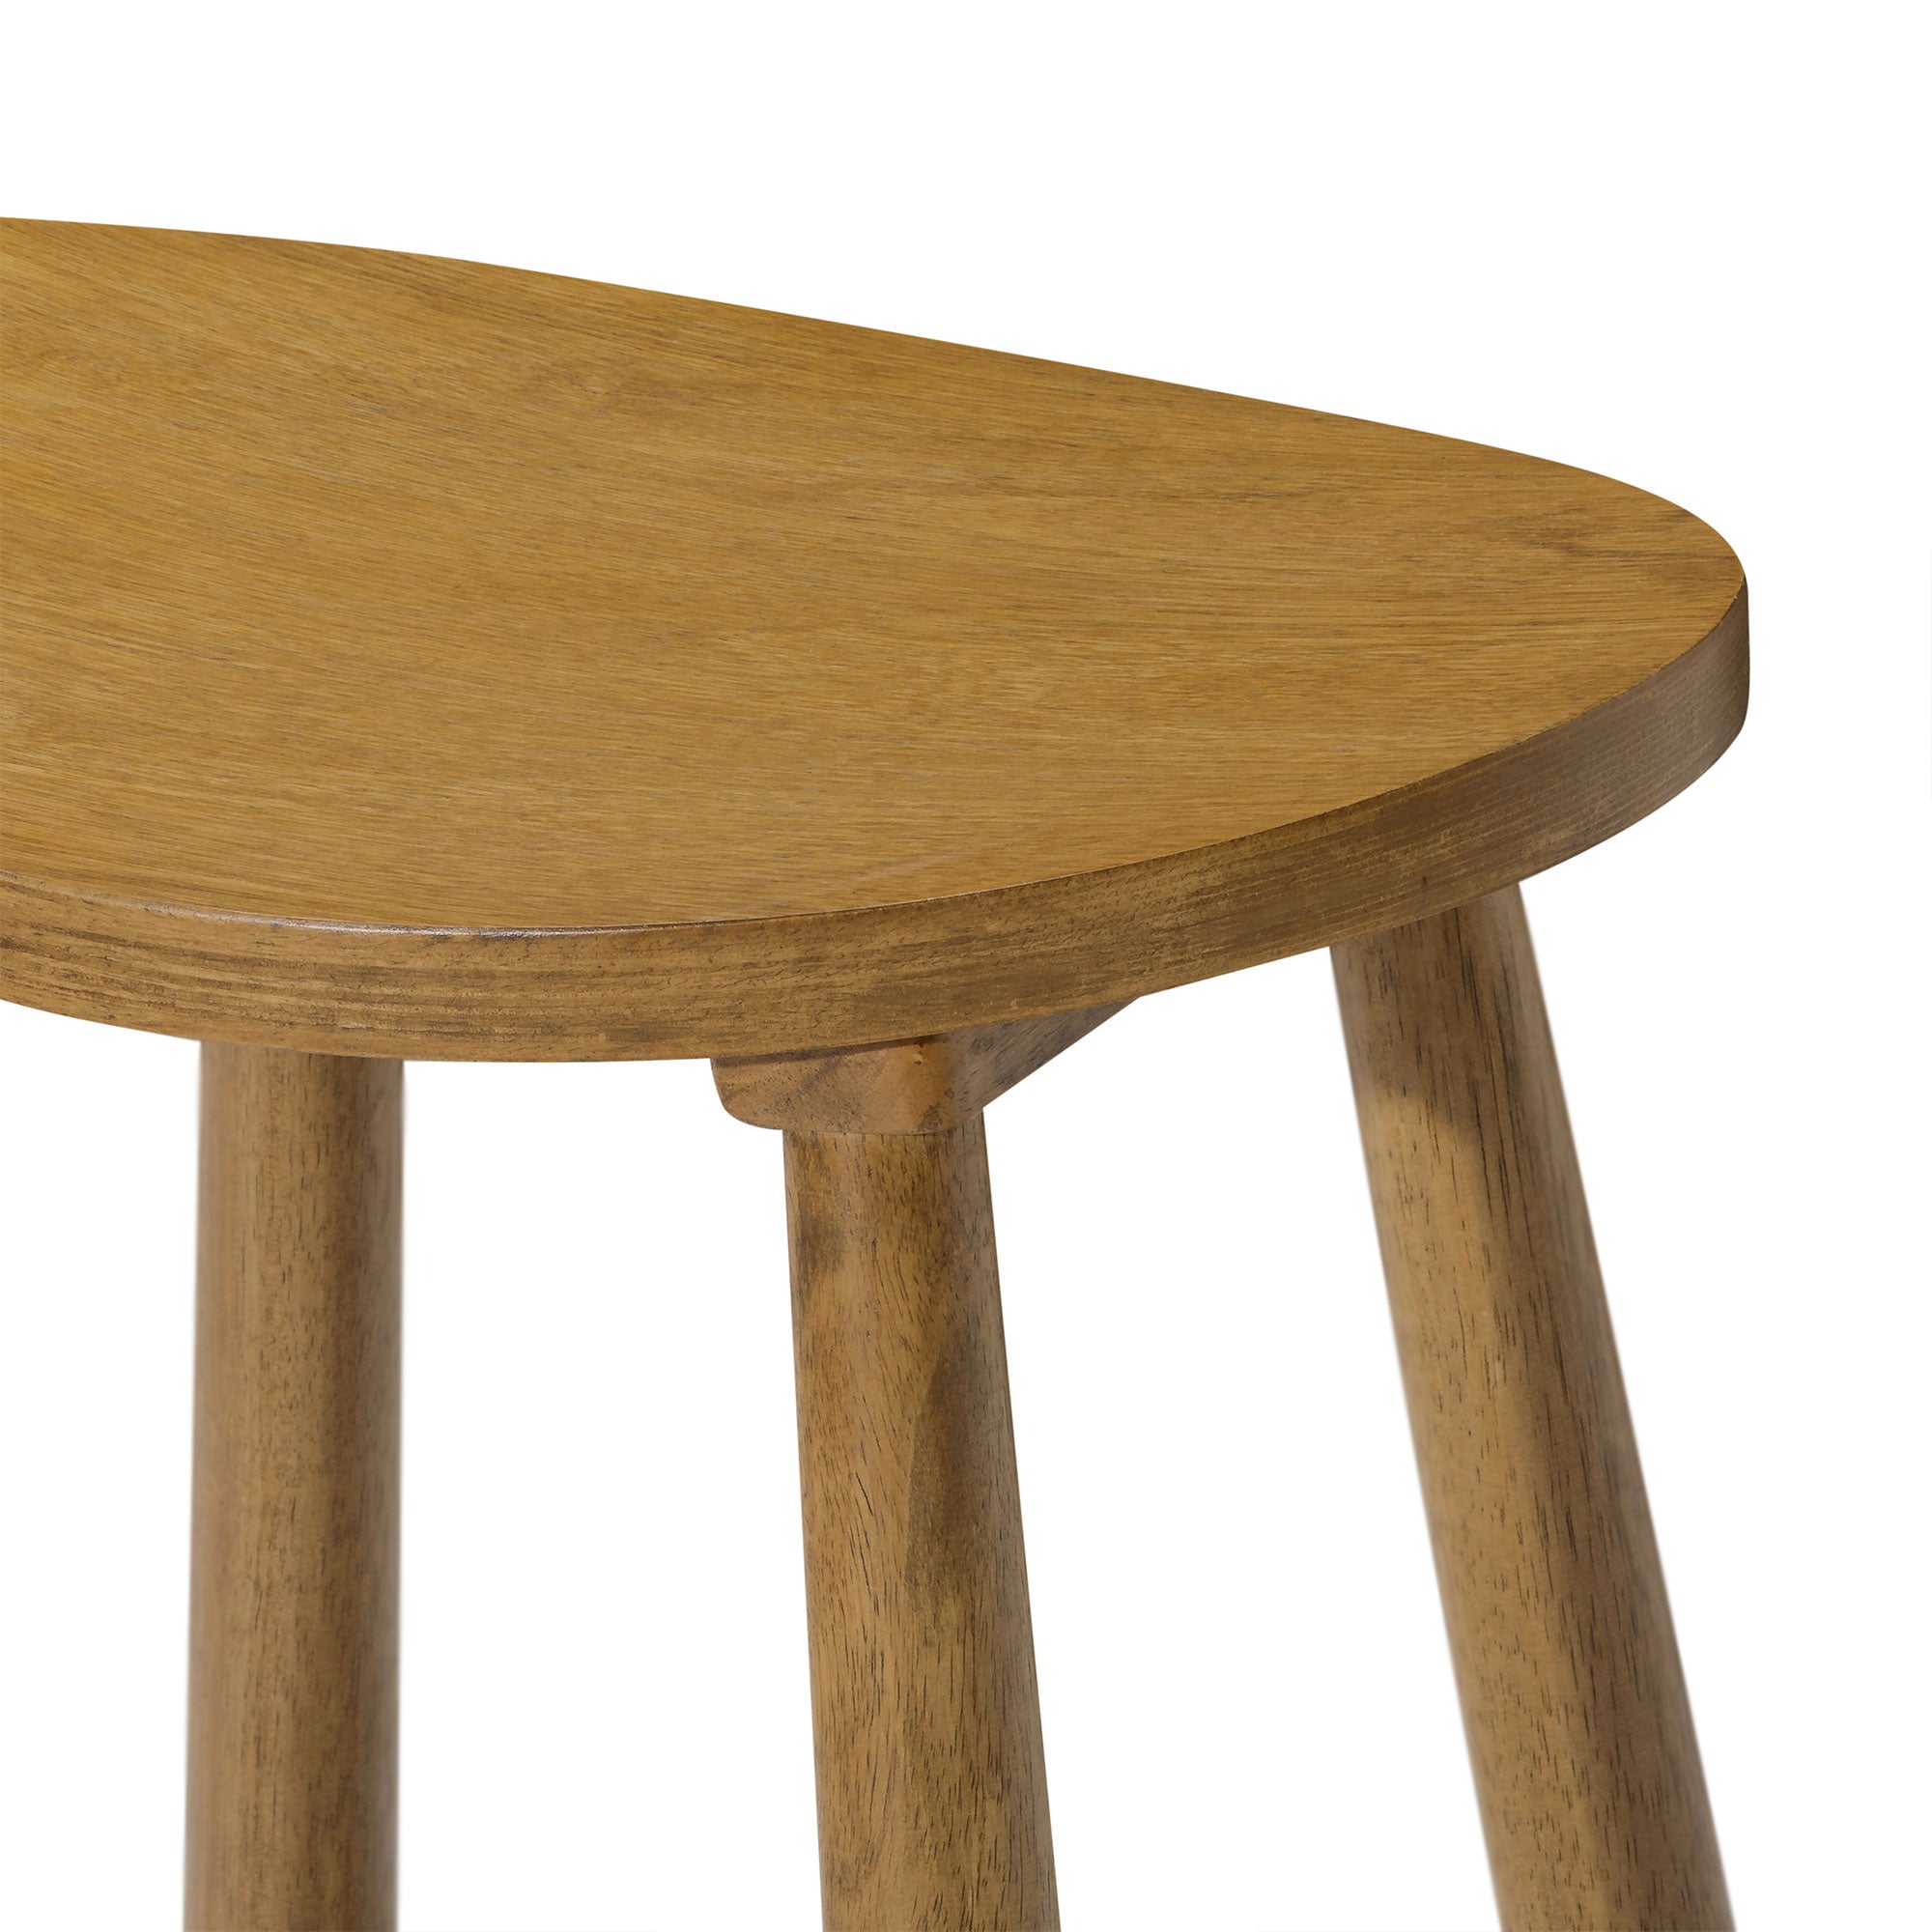 Luna Counter Stool in Rustic Natural Wood Finish in Stools by Maven Lane